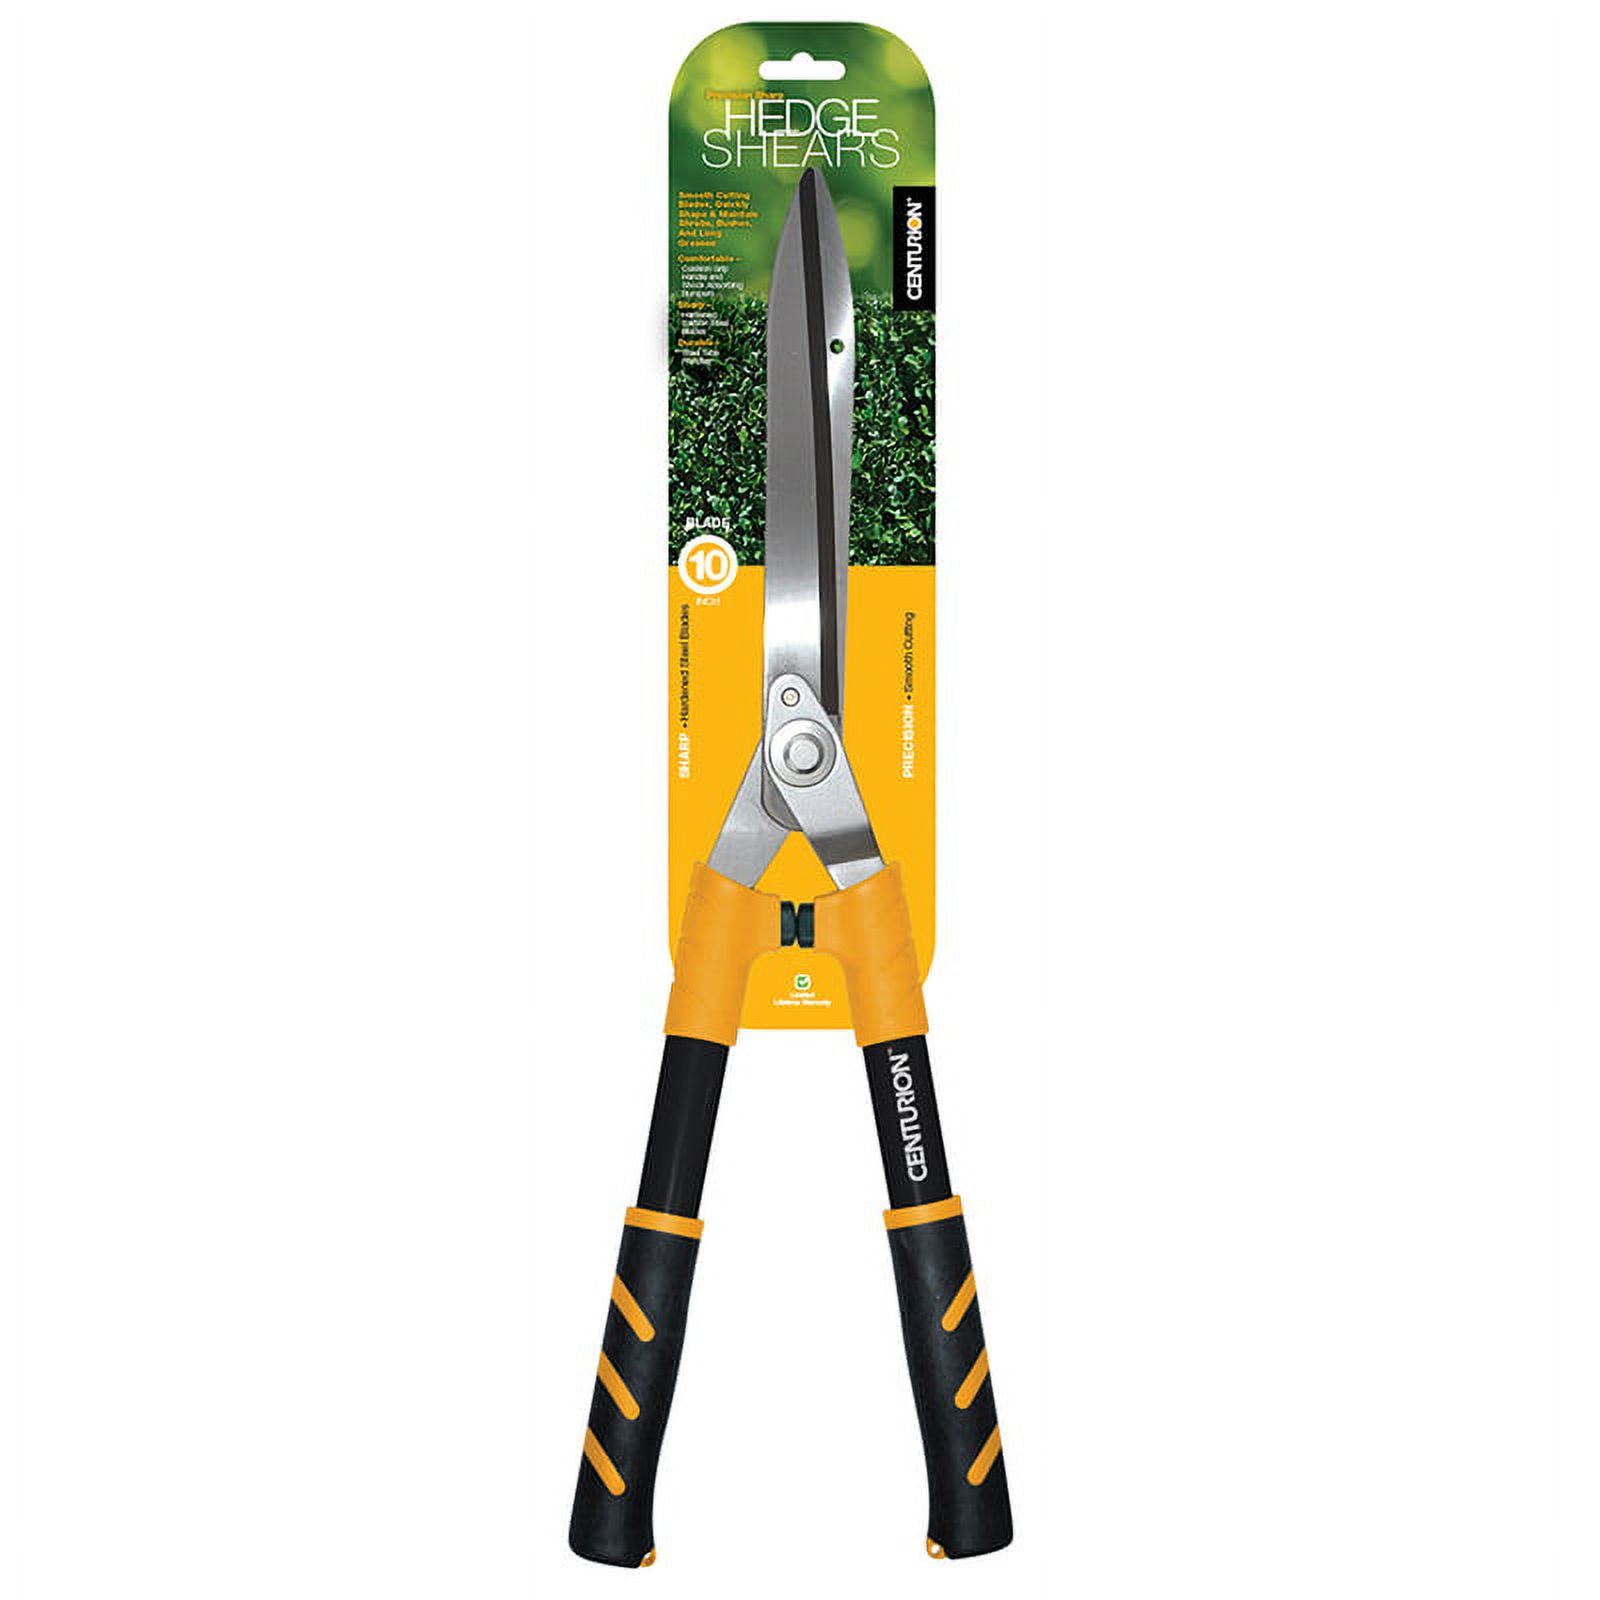 Centurion 208 23.62" X 8.27" X 2.59" Link-Force® Hardened Carbon Steel Hedge Shears - image 2 of 3